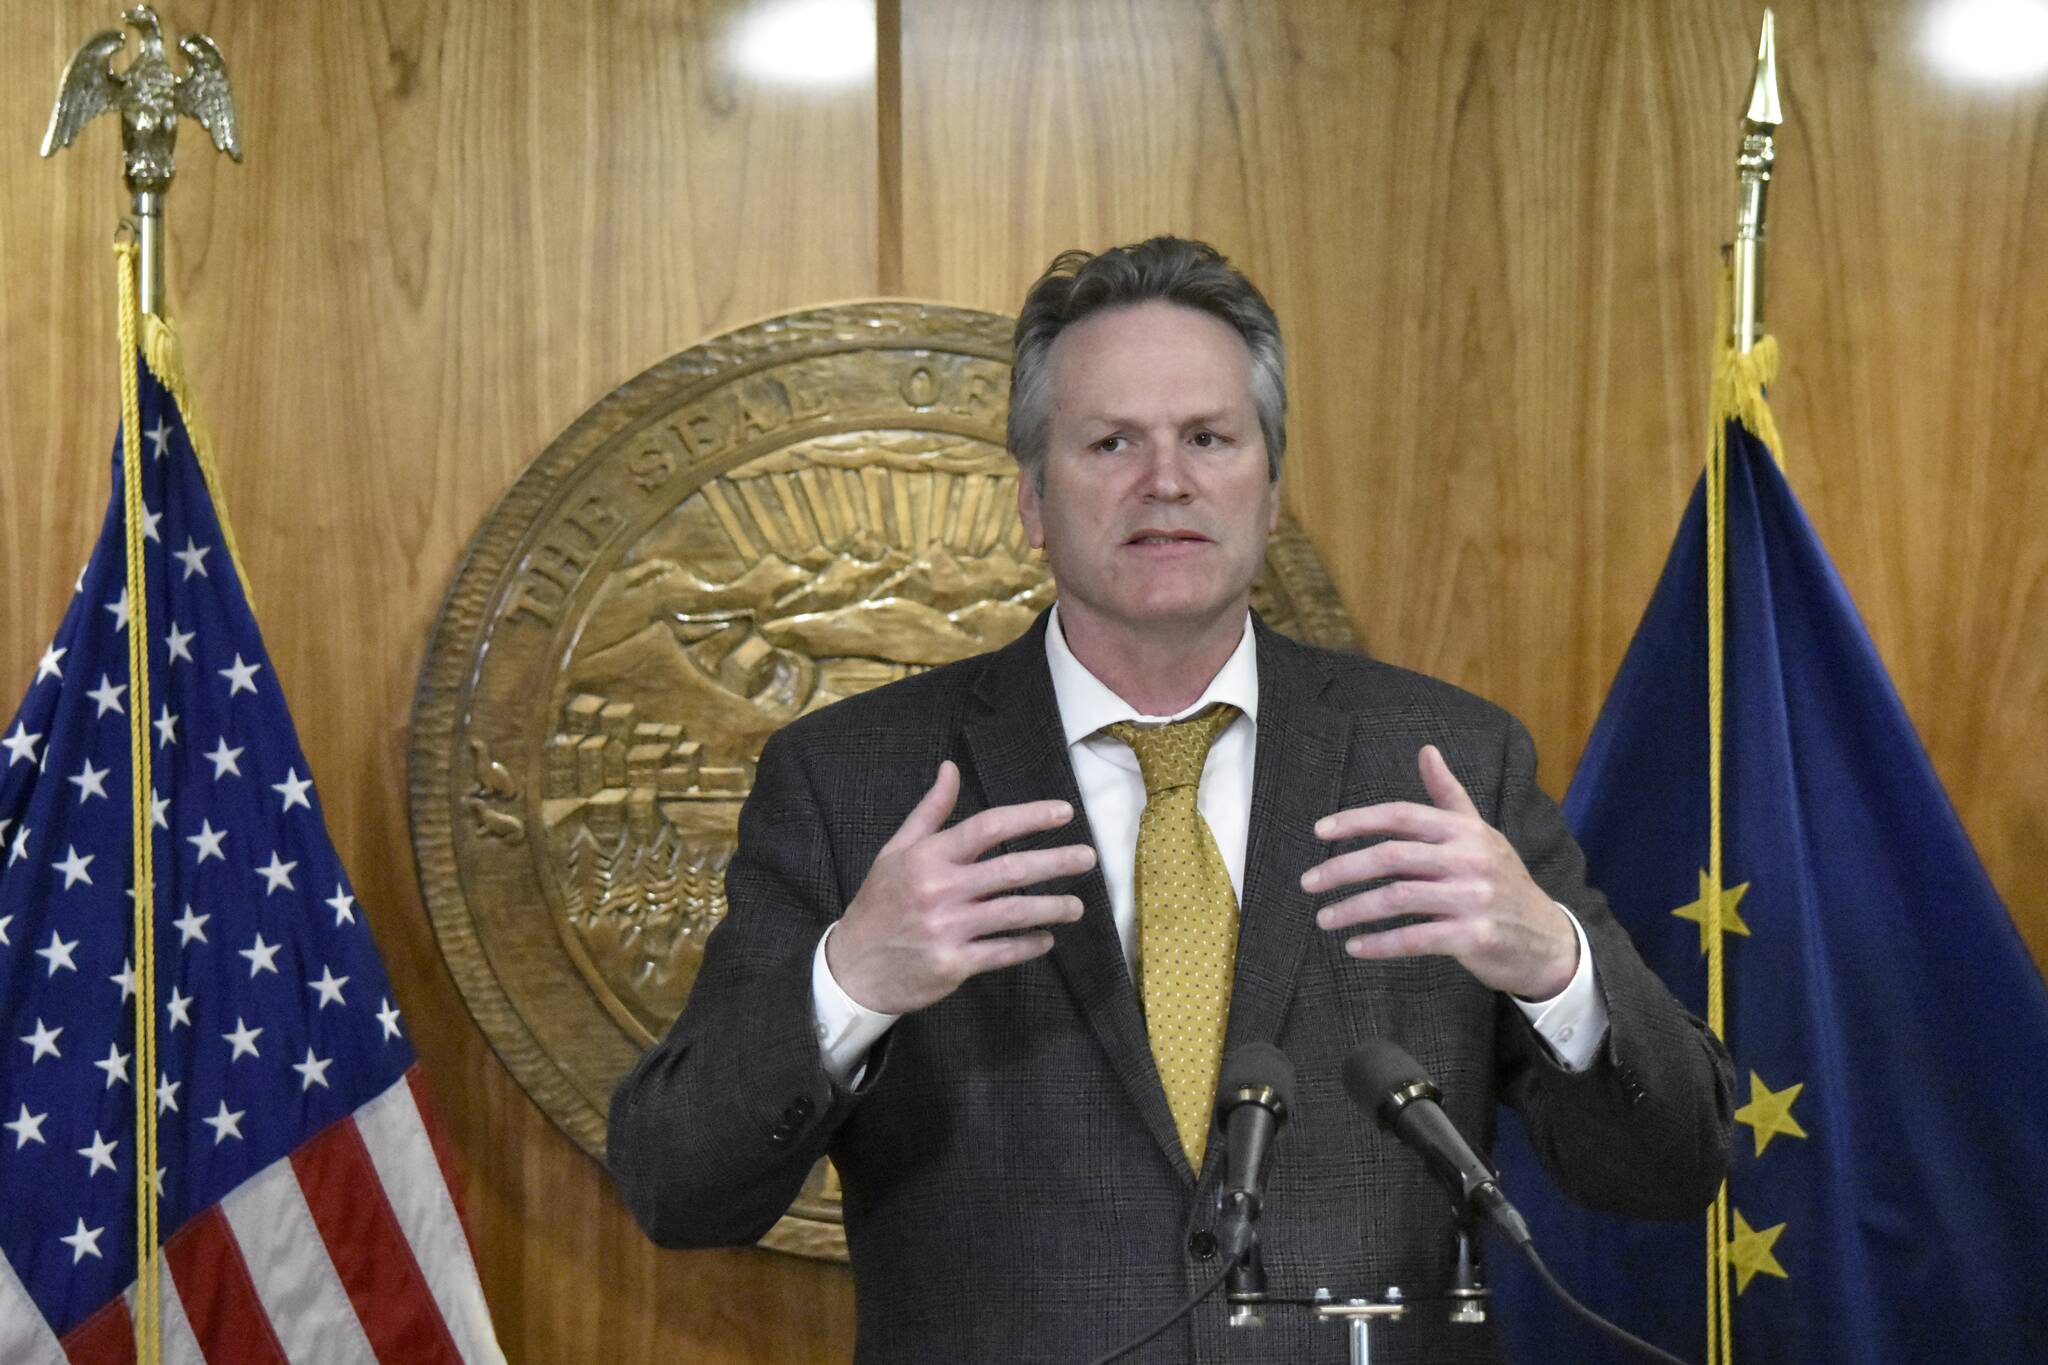 Gov. Mike Dunleavy speaks with reporters about the state's budget at the Alaska State Capitol on Thursday, May 19, 2022. Dunleavy, who received a conditional endorsement from former President Donald Trump, was among the first prominent Alaska politicians to weigh in on the FBI's search of Trump's property. (Peter Segall / Juneau Empire File)